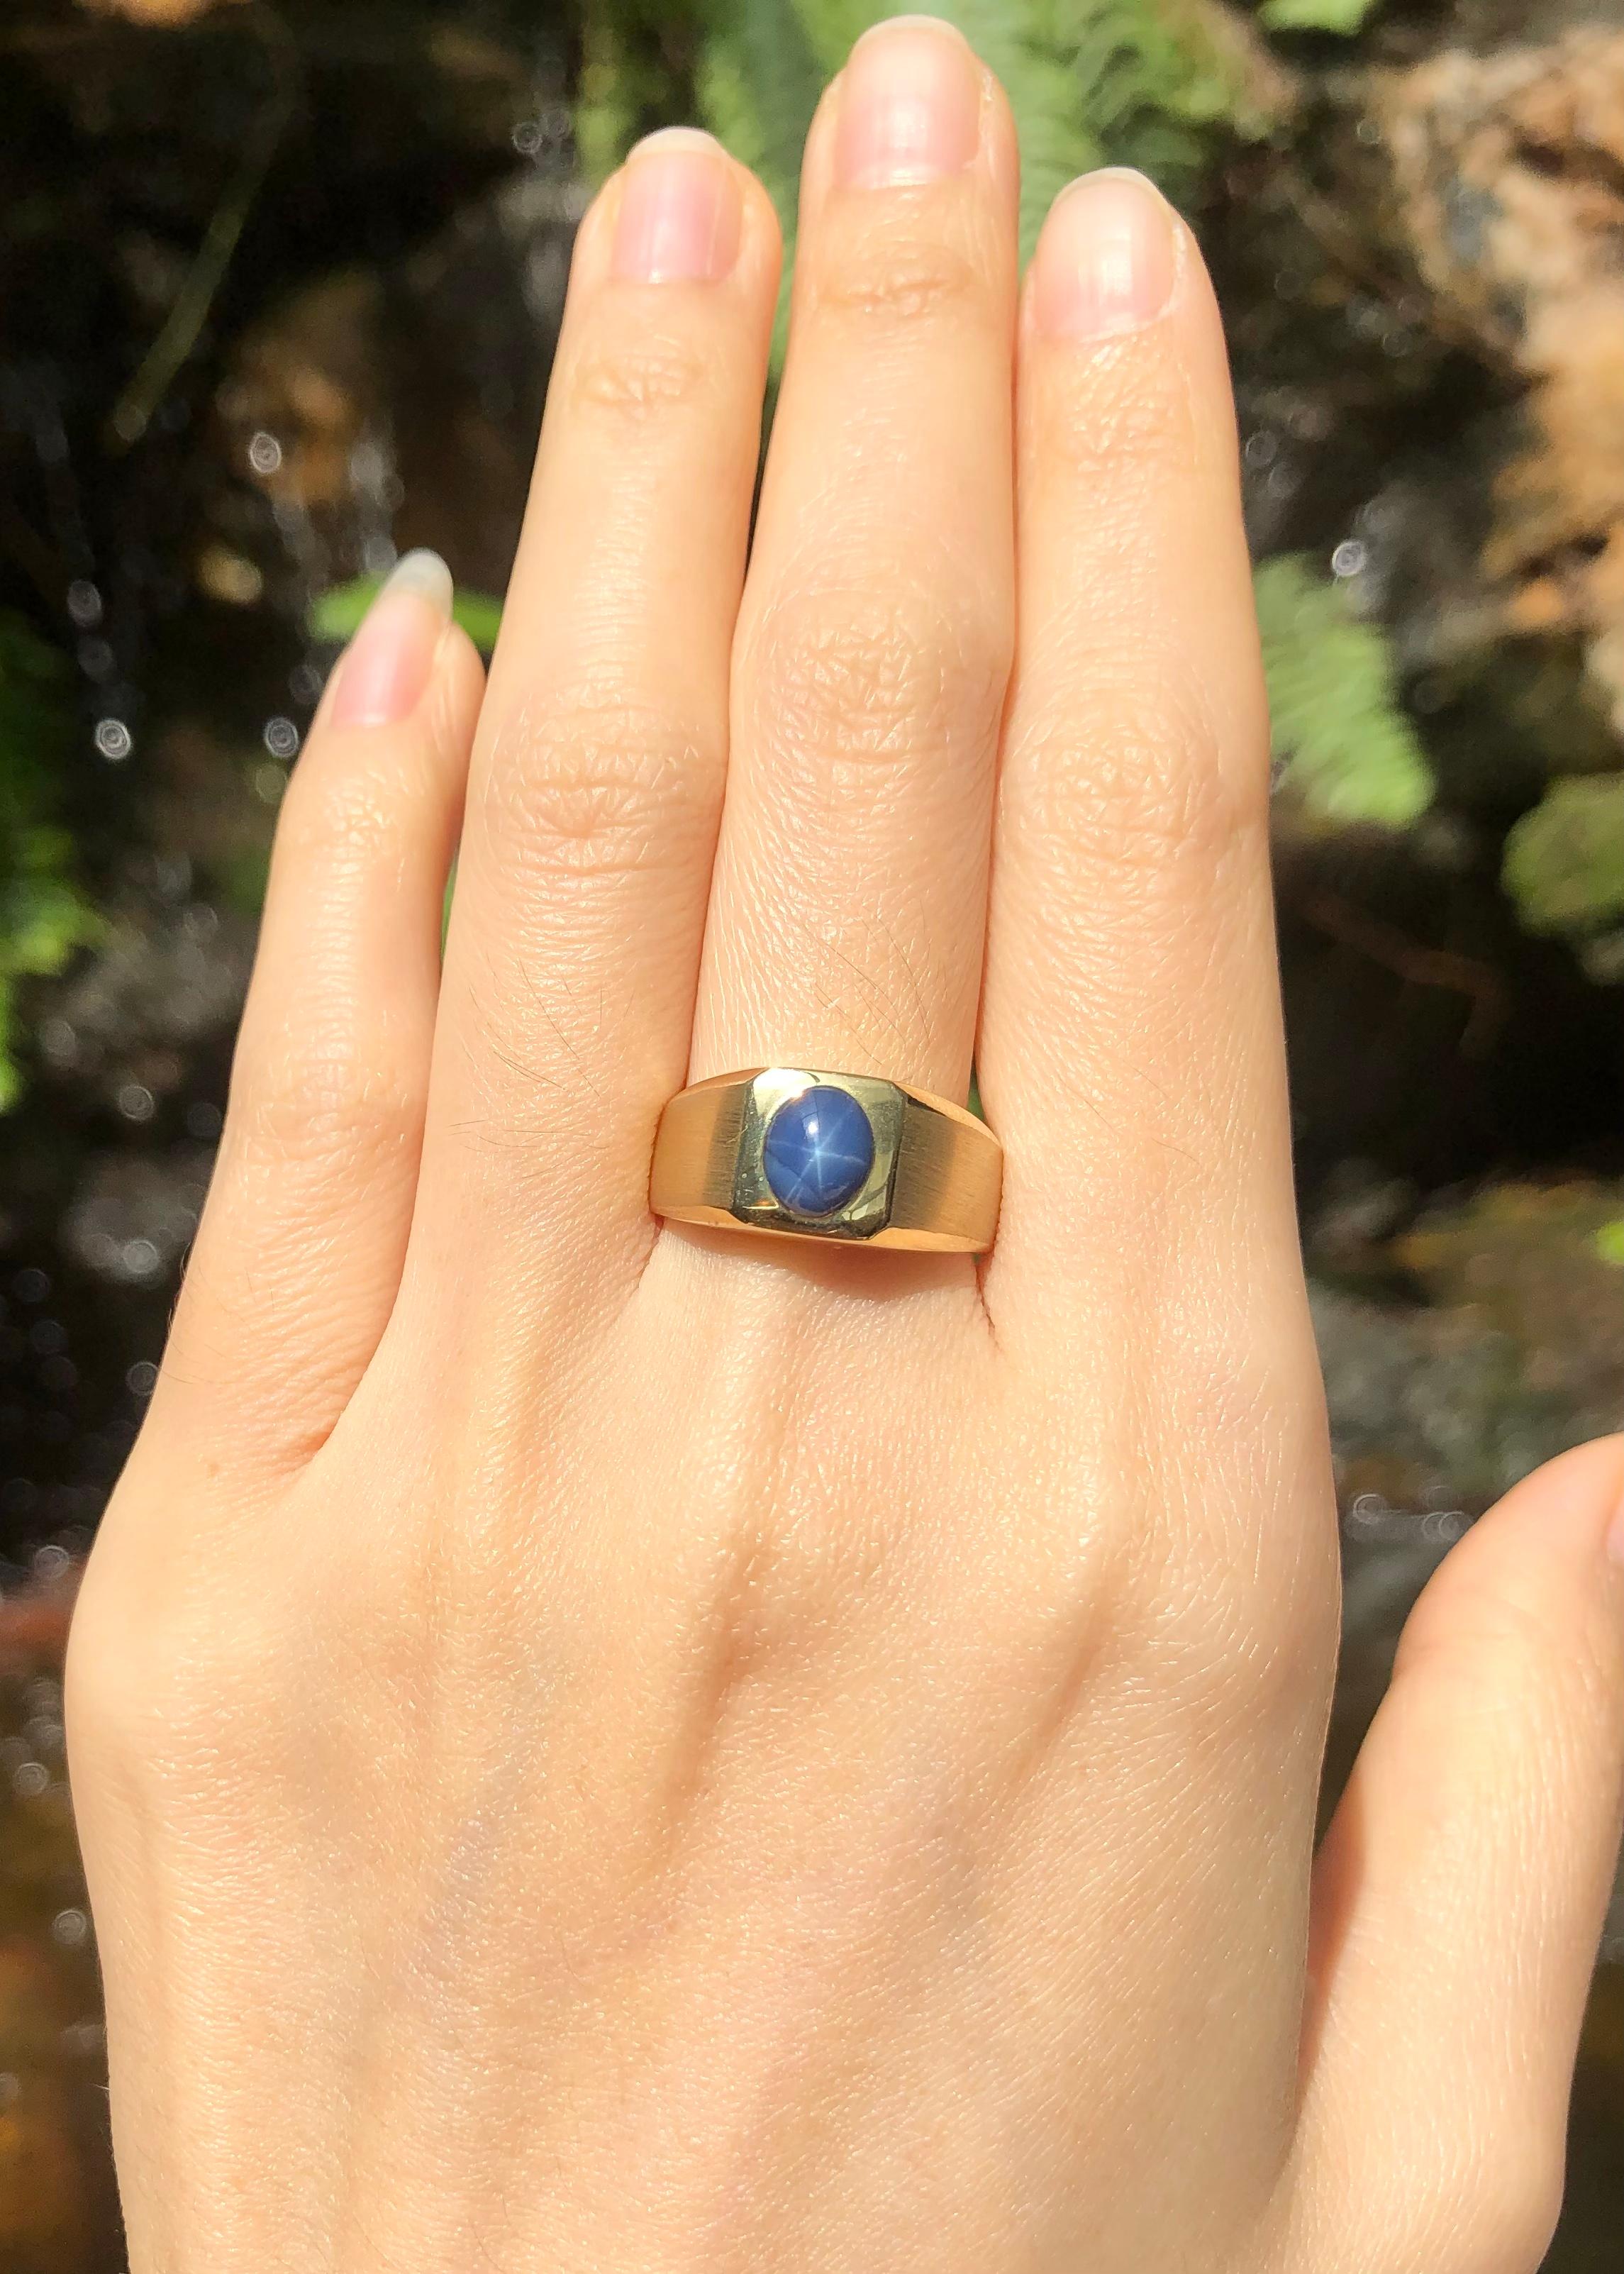 Blue Star Sapphire 1.53 carats Ring set in 18 Karat Gold Settings

Width:  0.8 cm 
Length: 0.9 cm
Ring Size: 59
Total Weight: 6.71 grams


